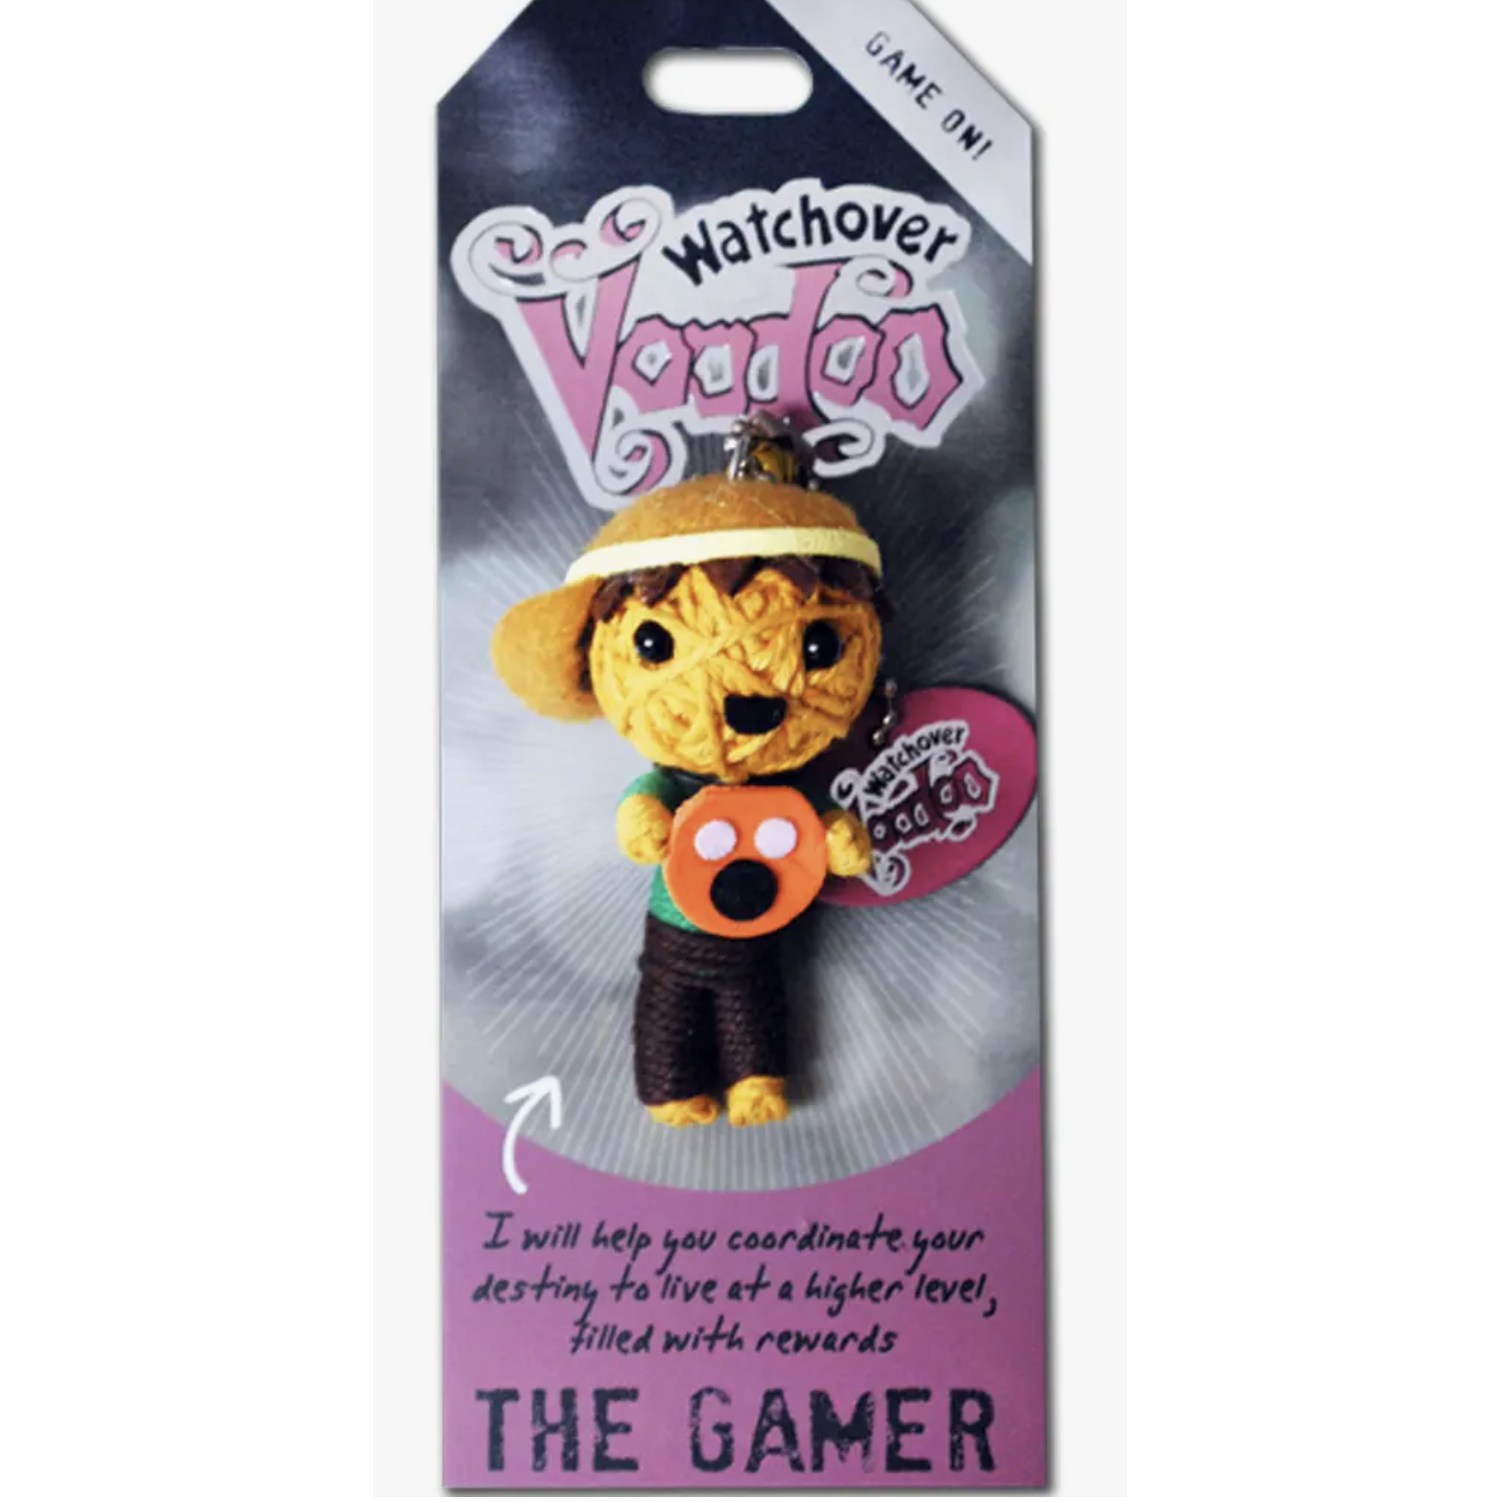 The Gamer Voodoo Doll